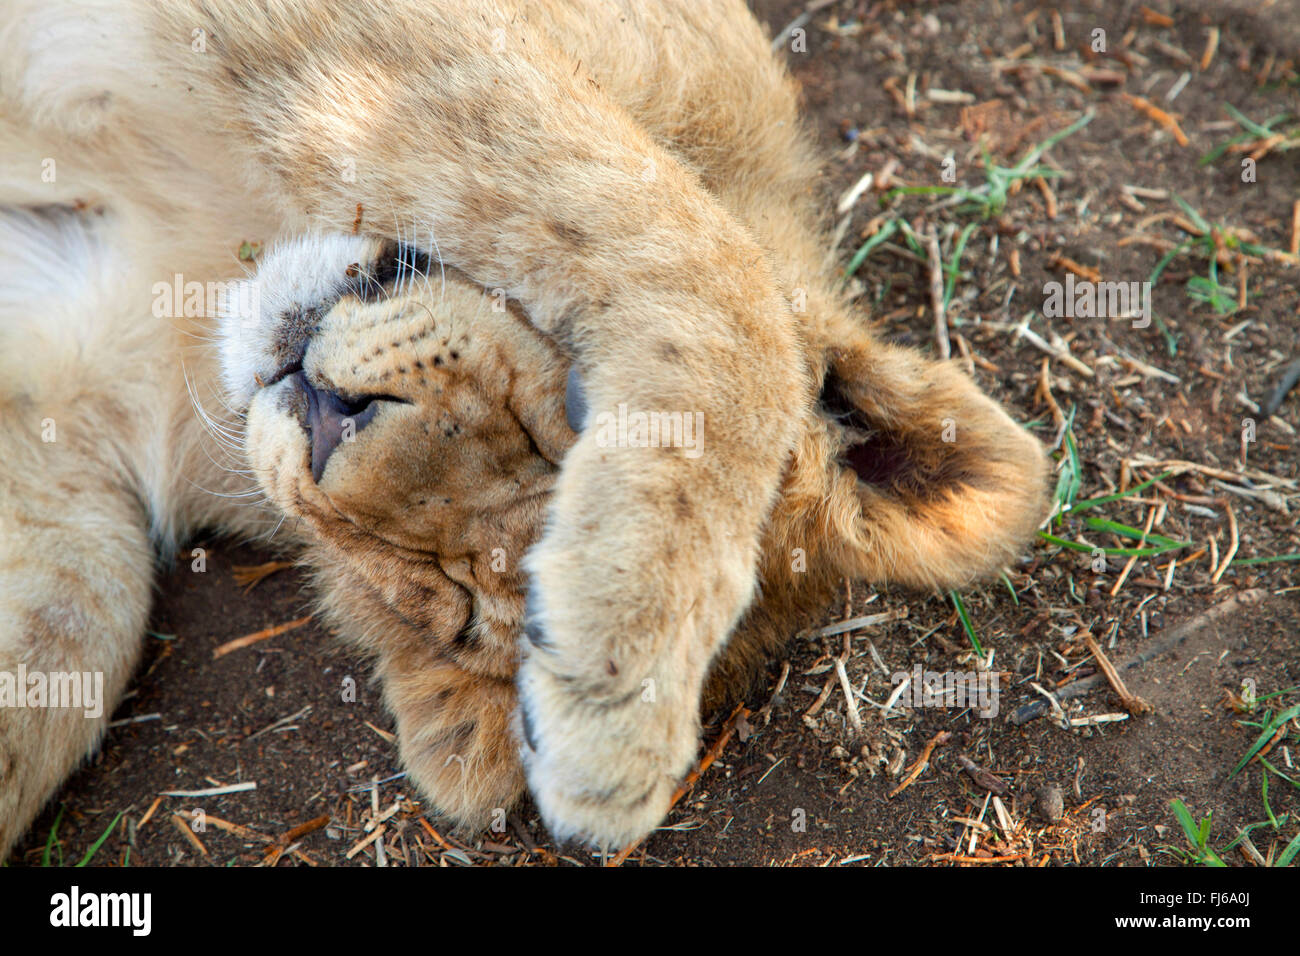 lion (Panthera leo), lion cub lying on the ground and rubing its eyes, portrait, South Africa Stock Photo